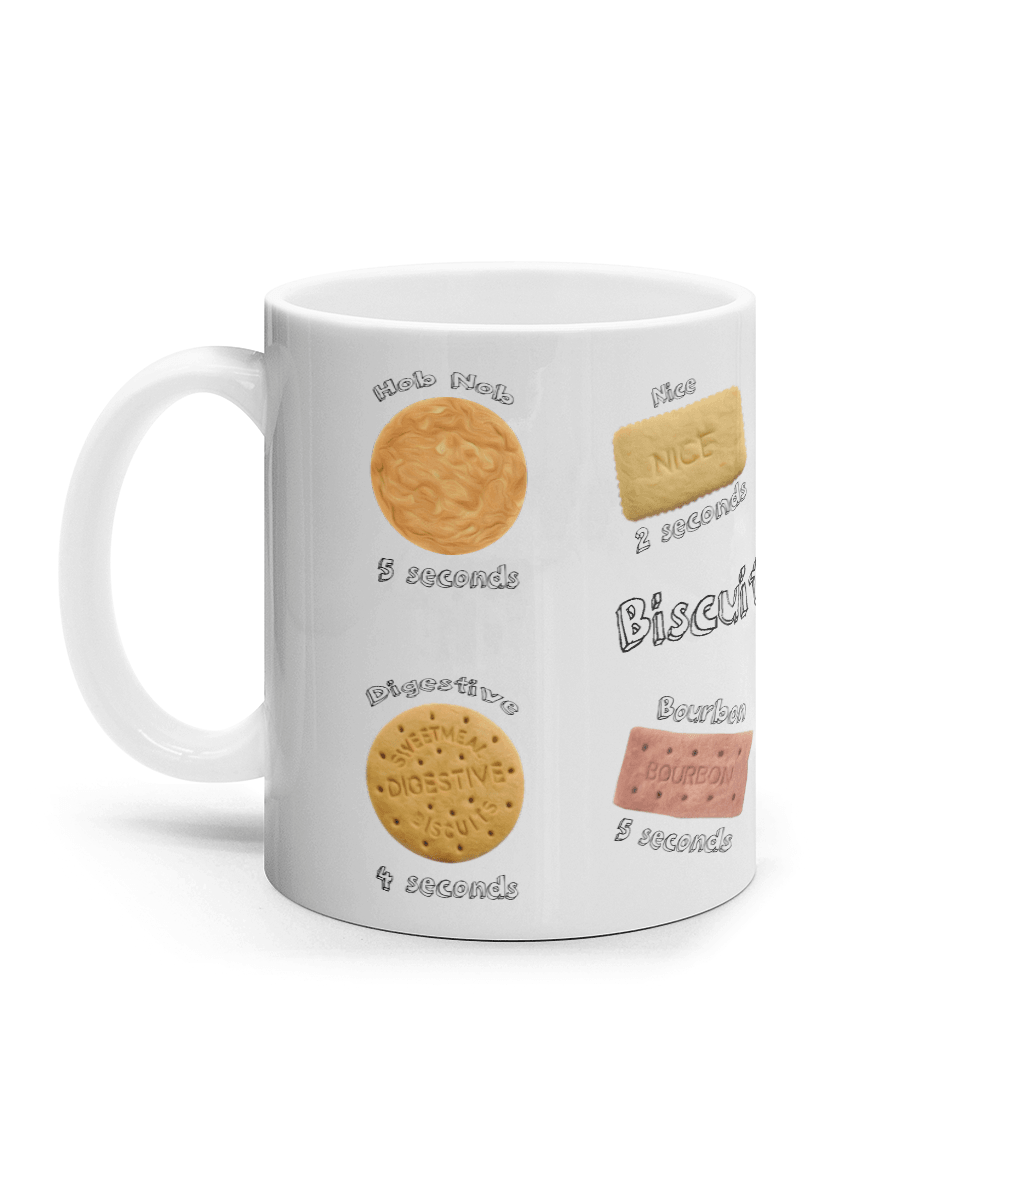 Top 10 Biscuits Mug With Dunk Seconds - DuvetDay.co.uk